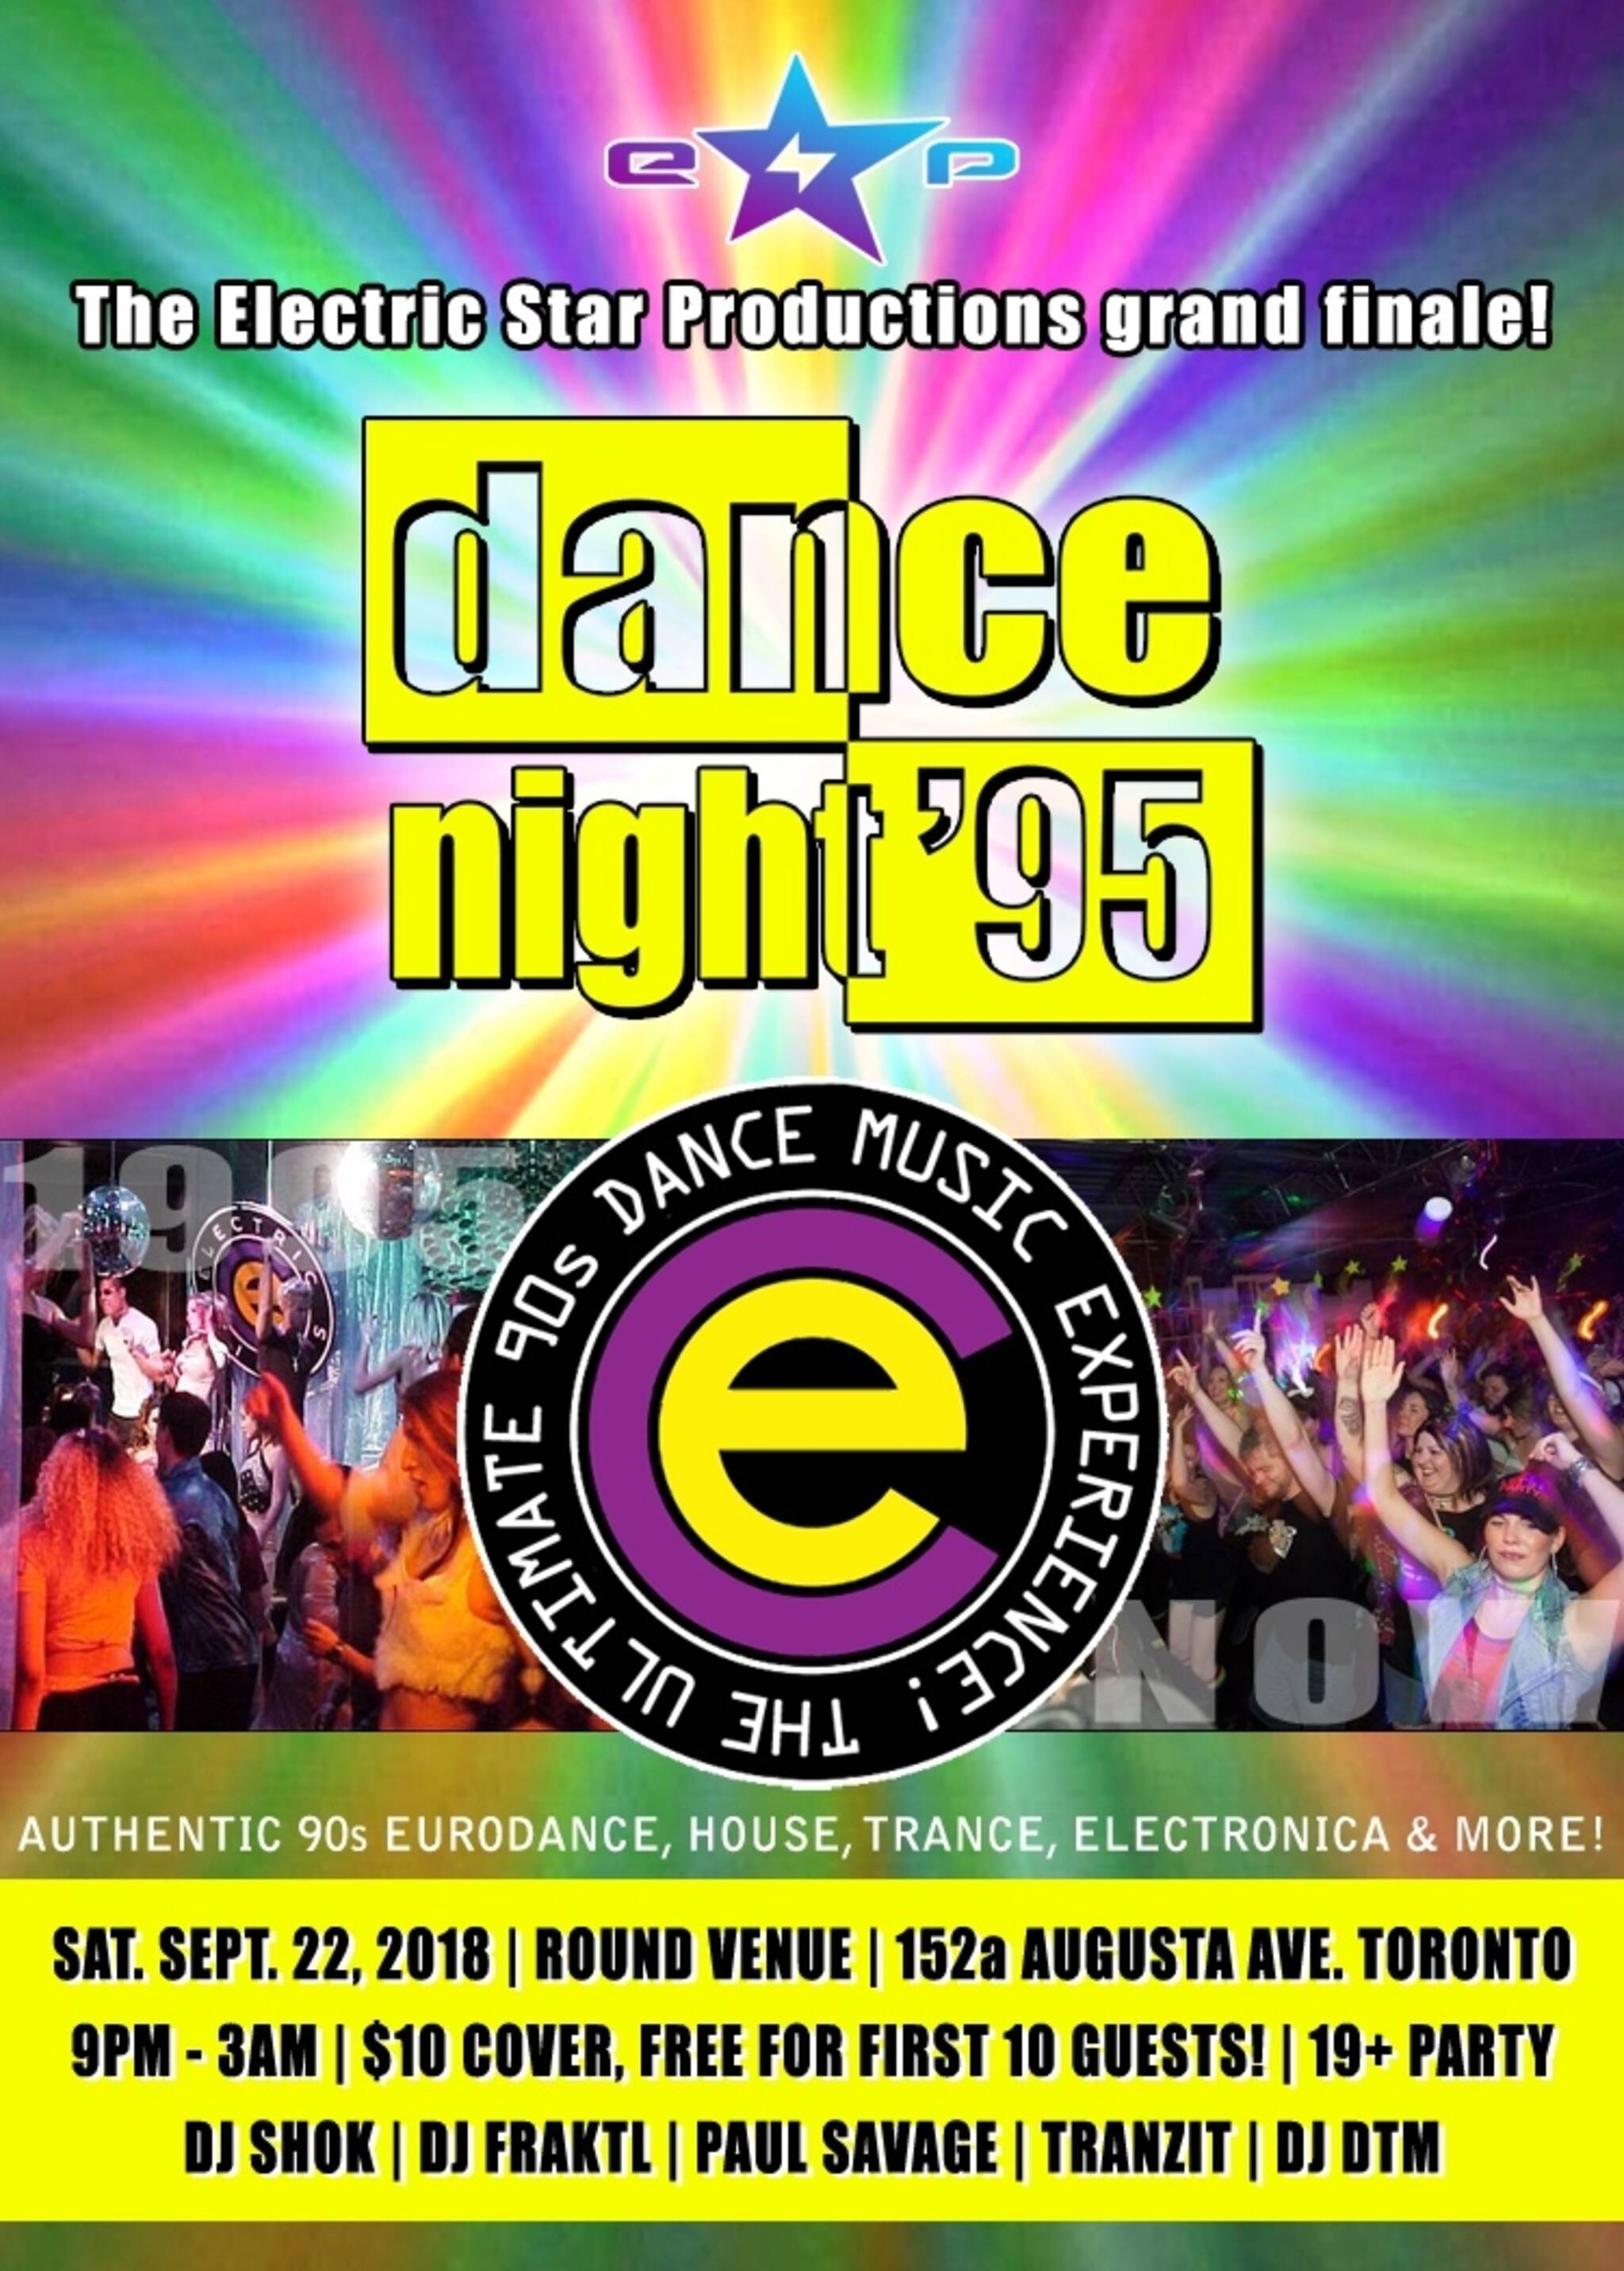 Dance Night 95 - The Next Electric Circus Experience